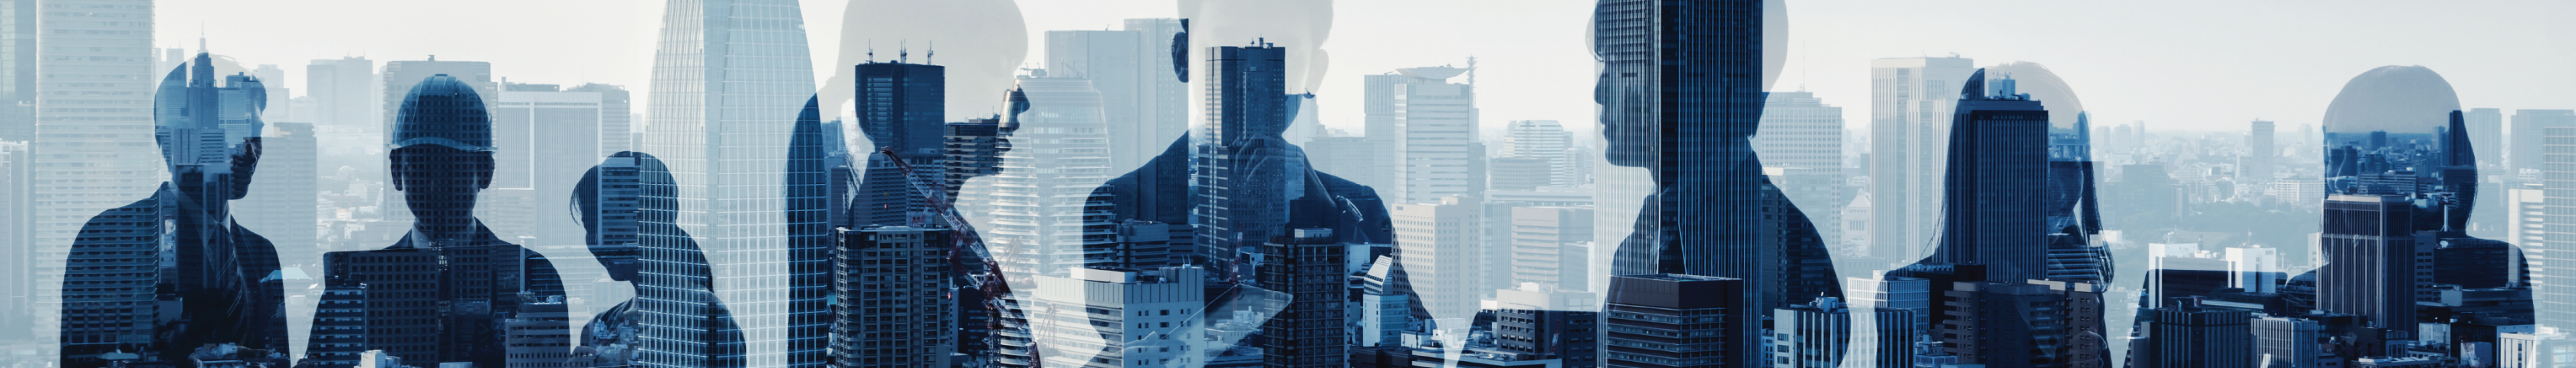 Business people silhouette over background of city skyline